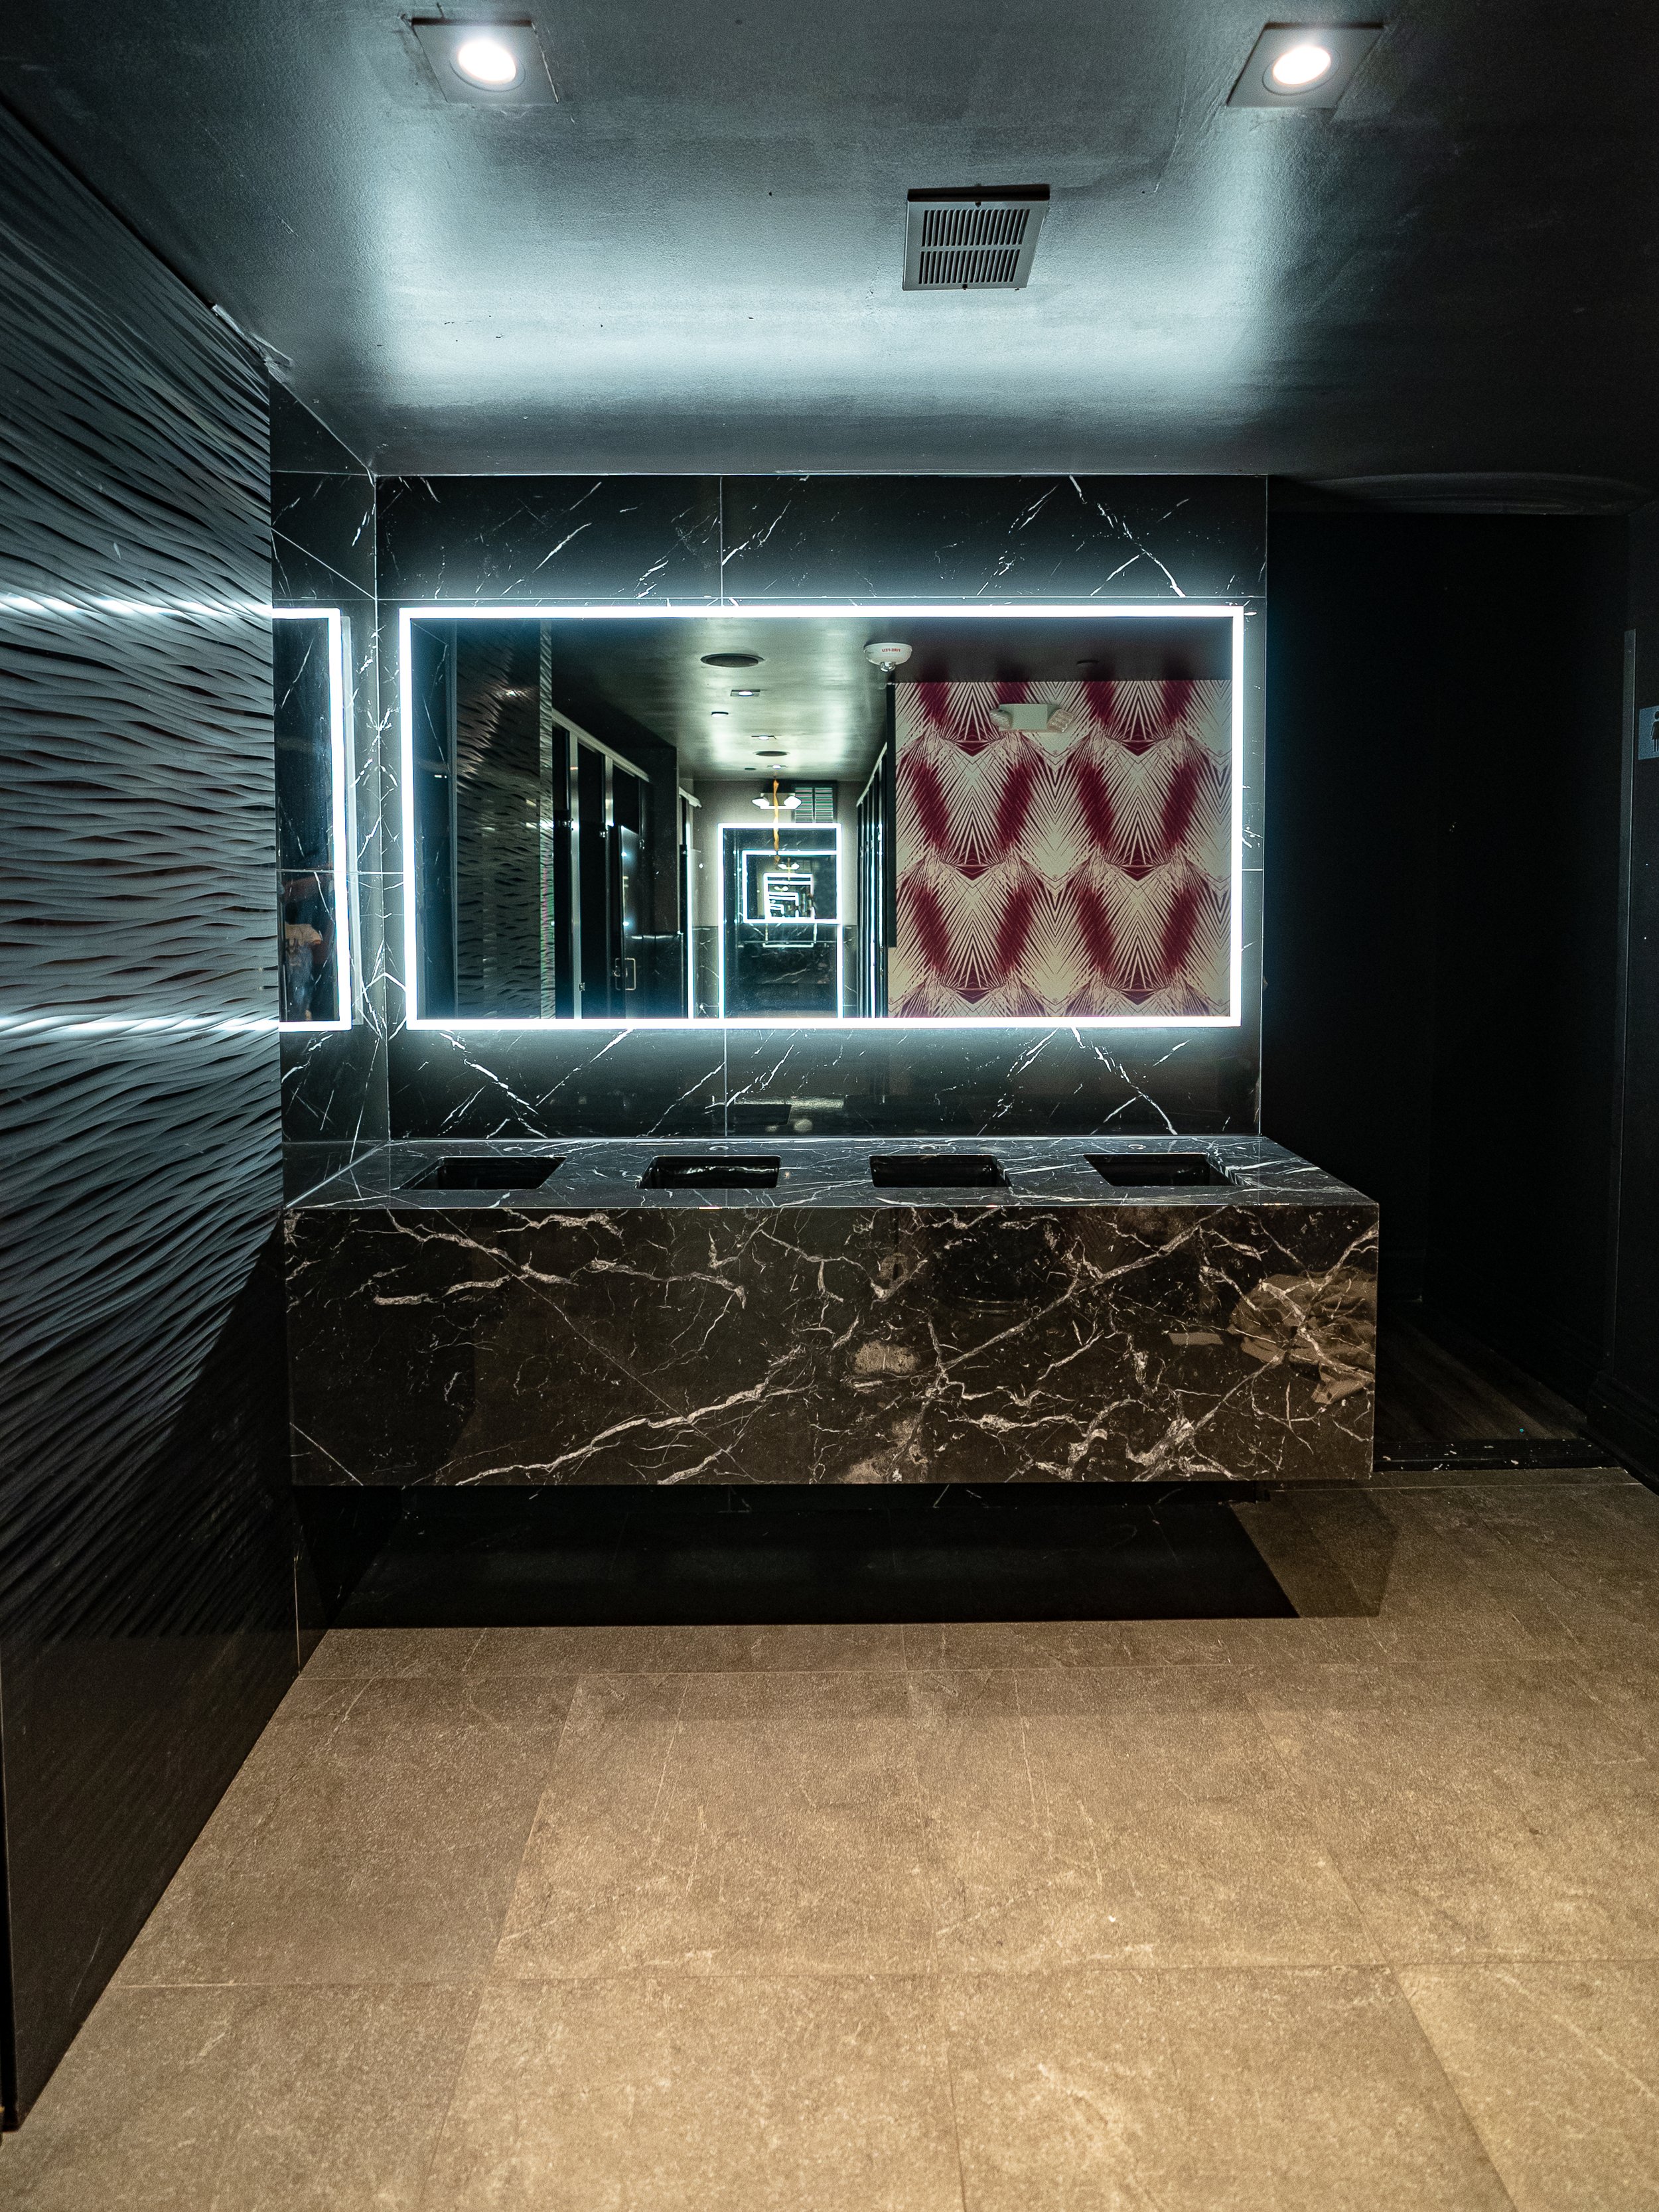  Club 44, a luxury nightclub in downtown Toronto, has all its Nero Marquina vanities restored &amp; protected with polished PROSHIELD. 